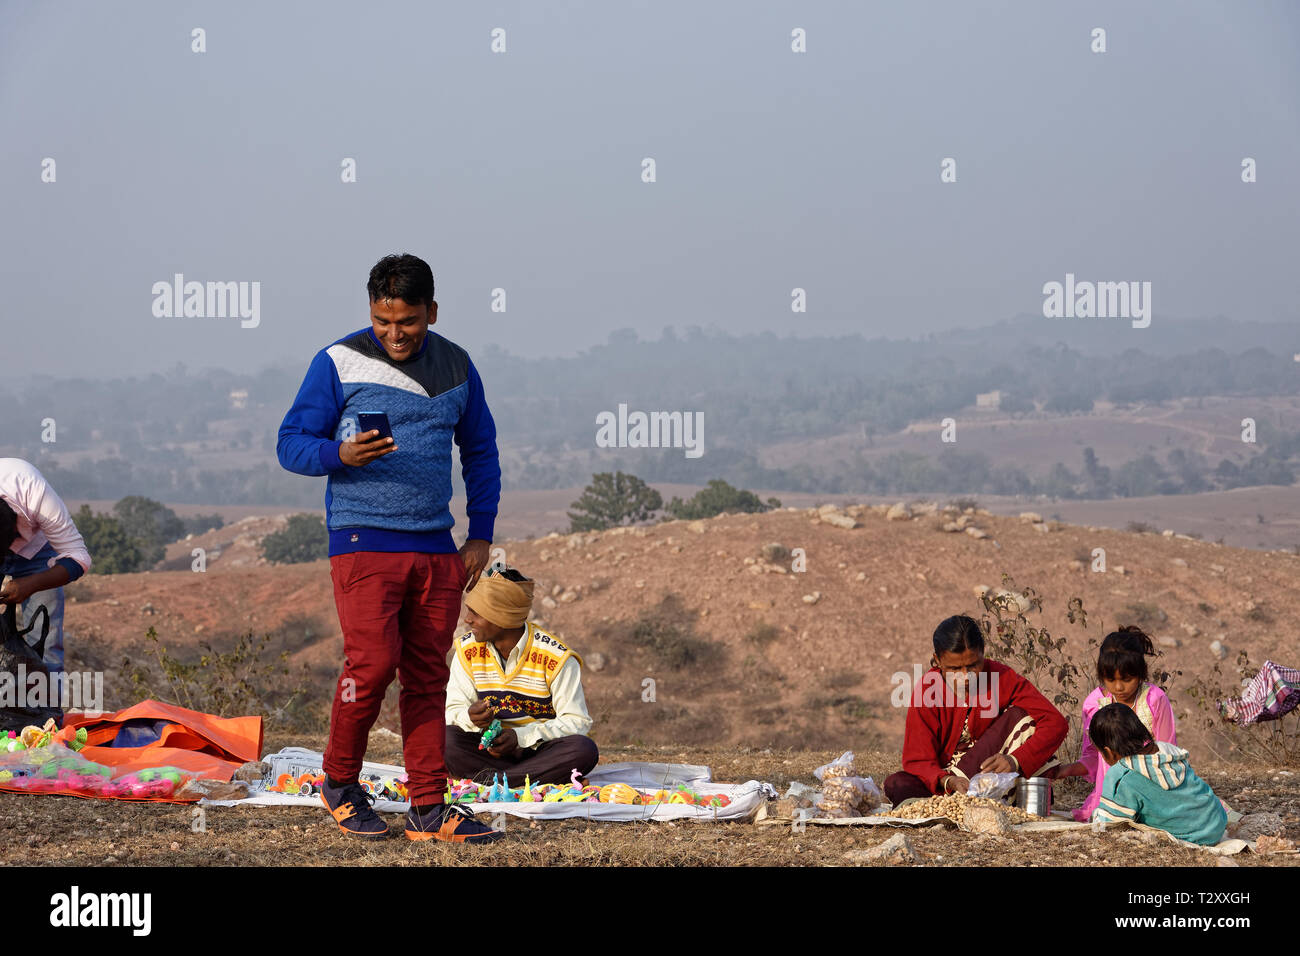 An Indian man is smiling with cellphone in a rural hilltop fair. Stock Photo